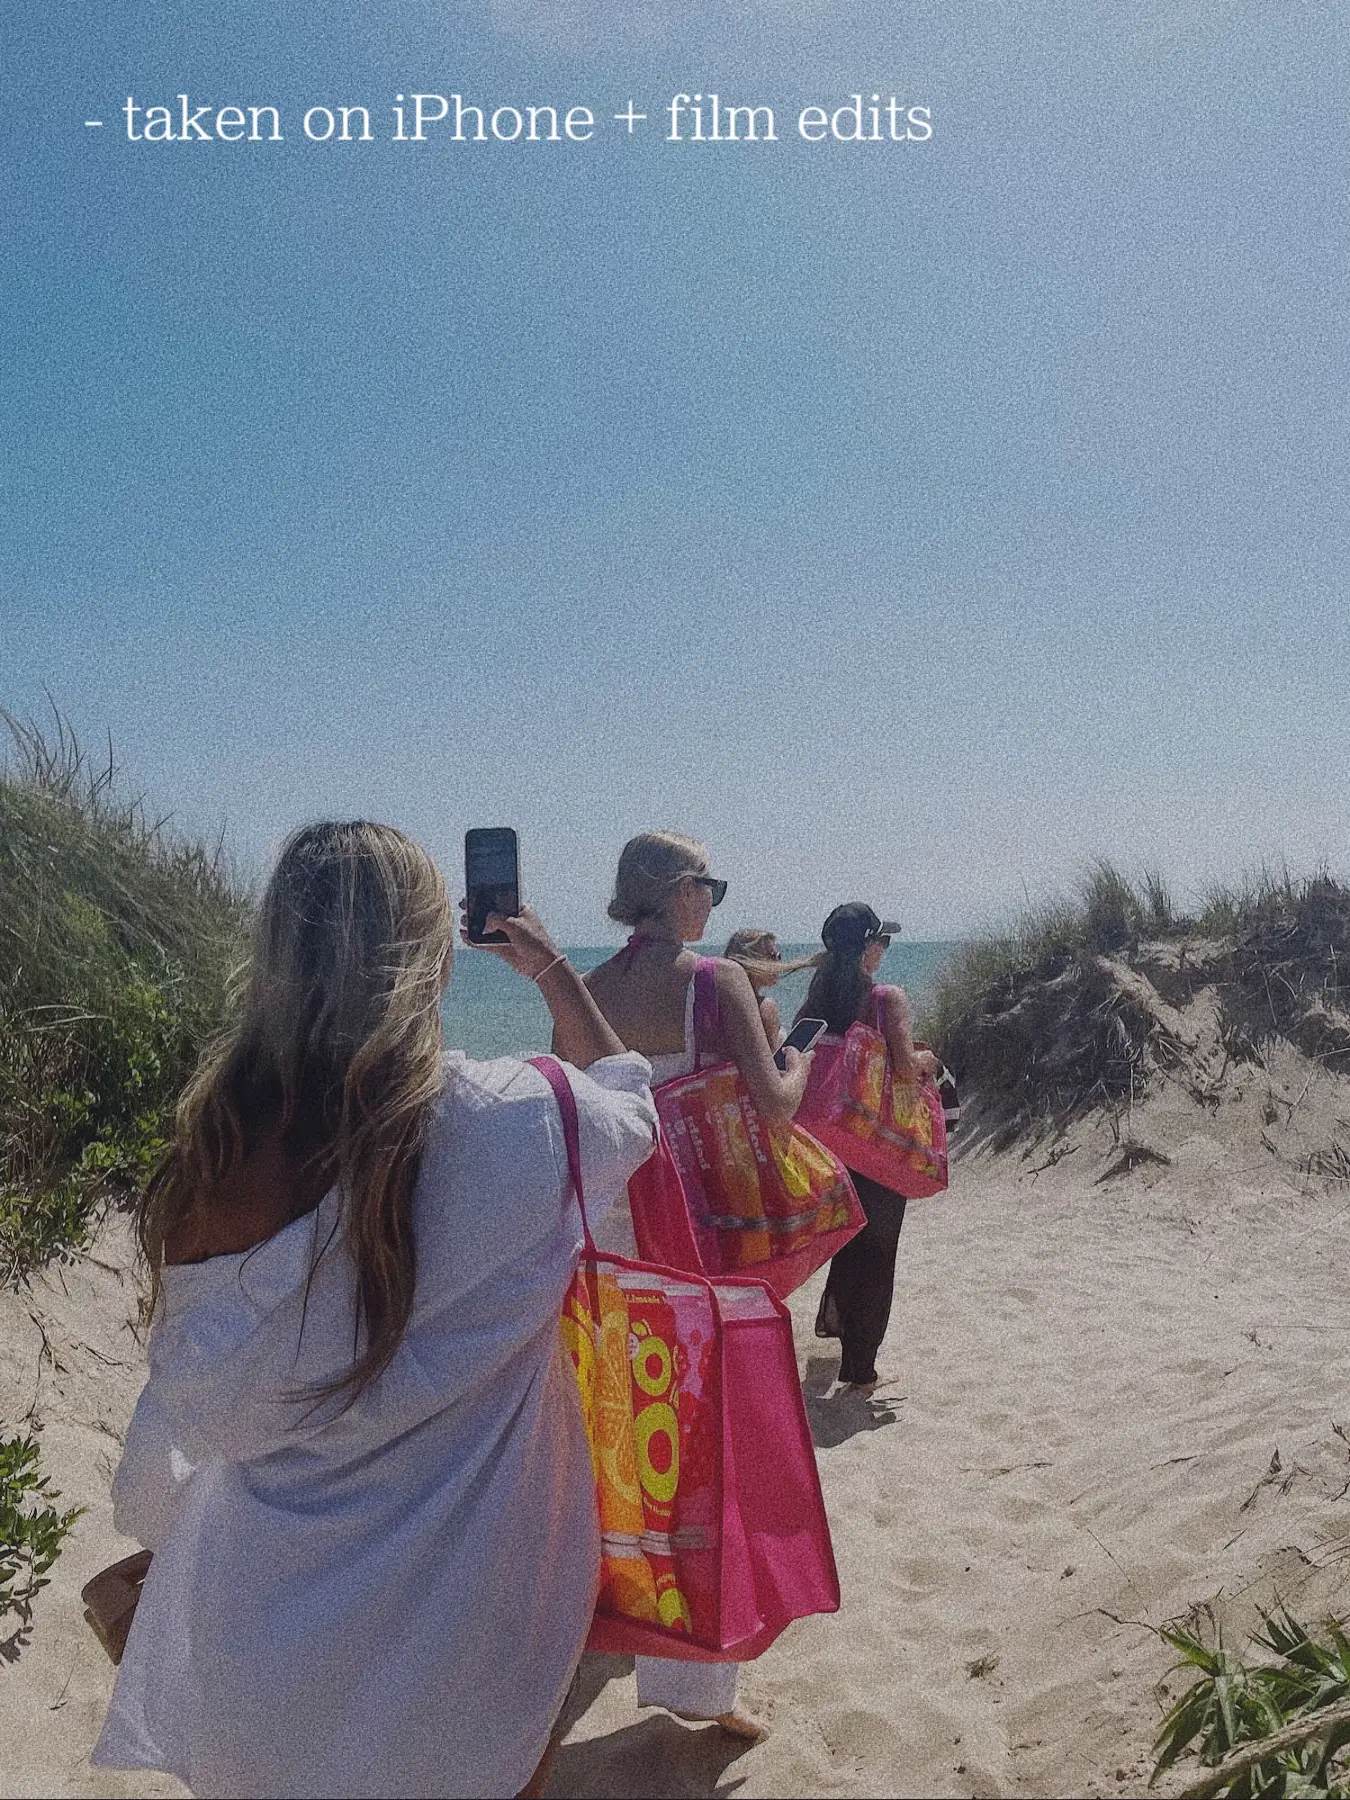  A group of people are walking on a beach, with some of them holding bags. One person is taking a selfie with the others in the background.